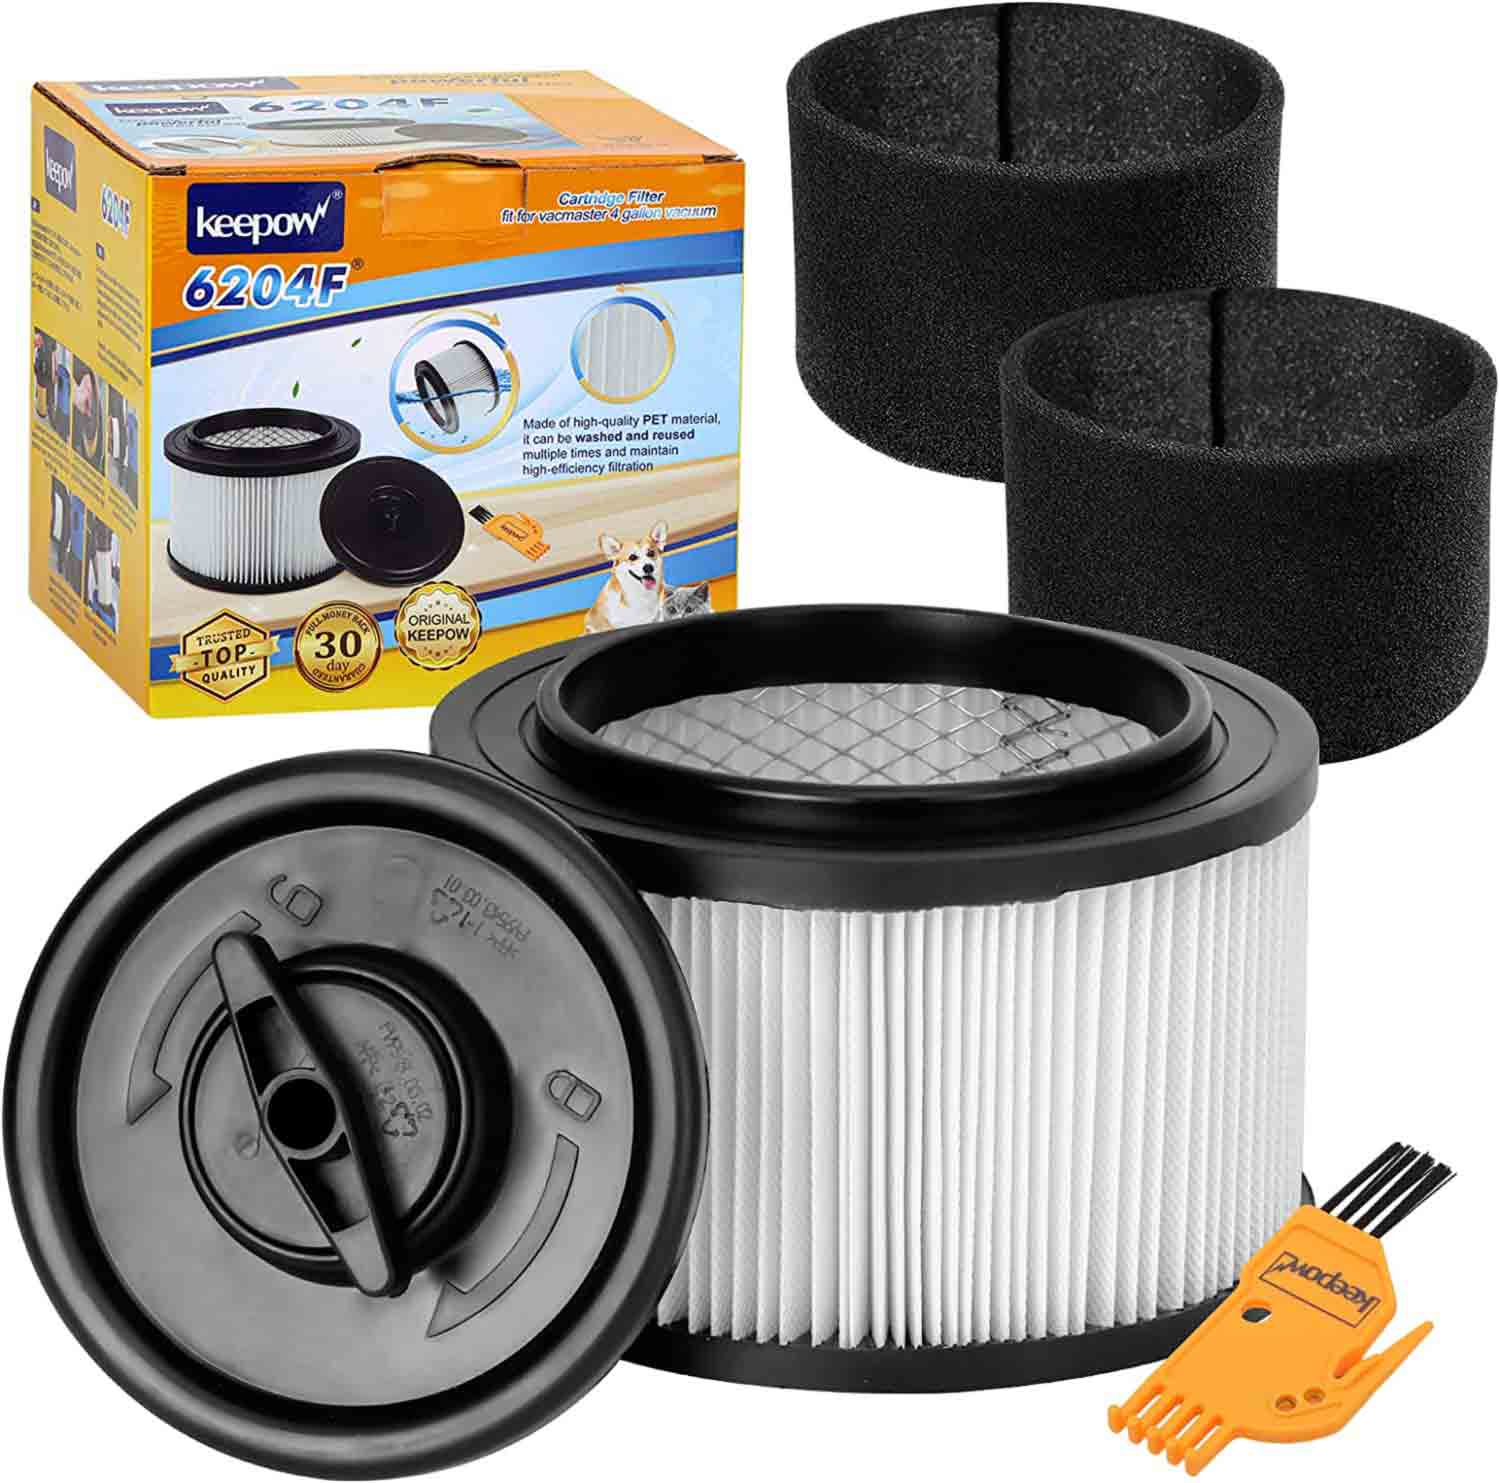 KEEPOW Replacement Cartridge Filter Set for Vacmaster 4-Gallon